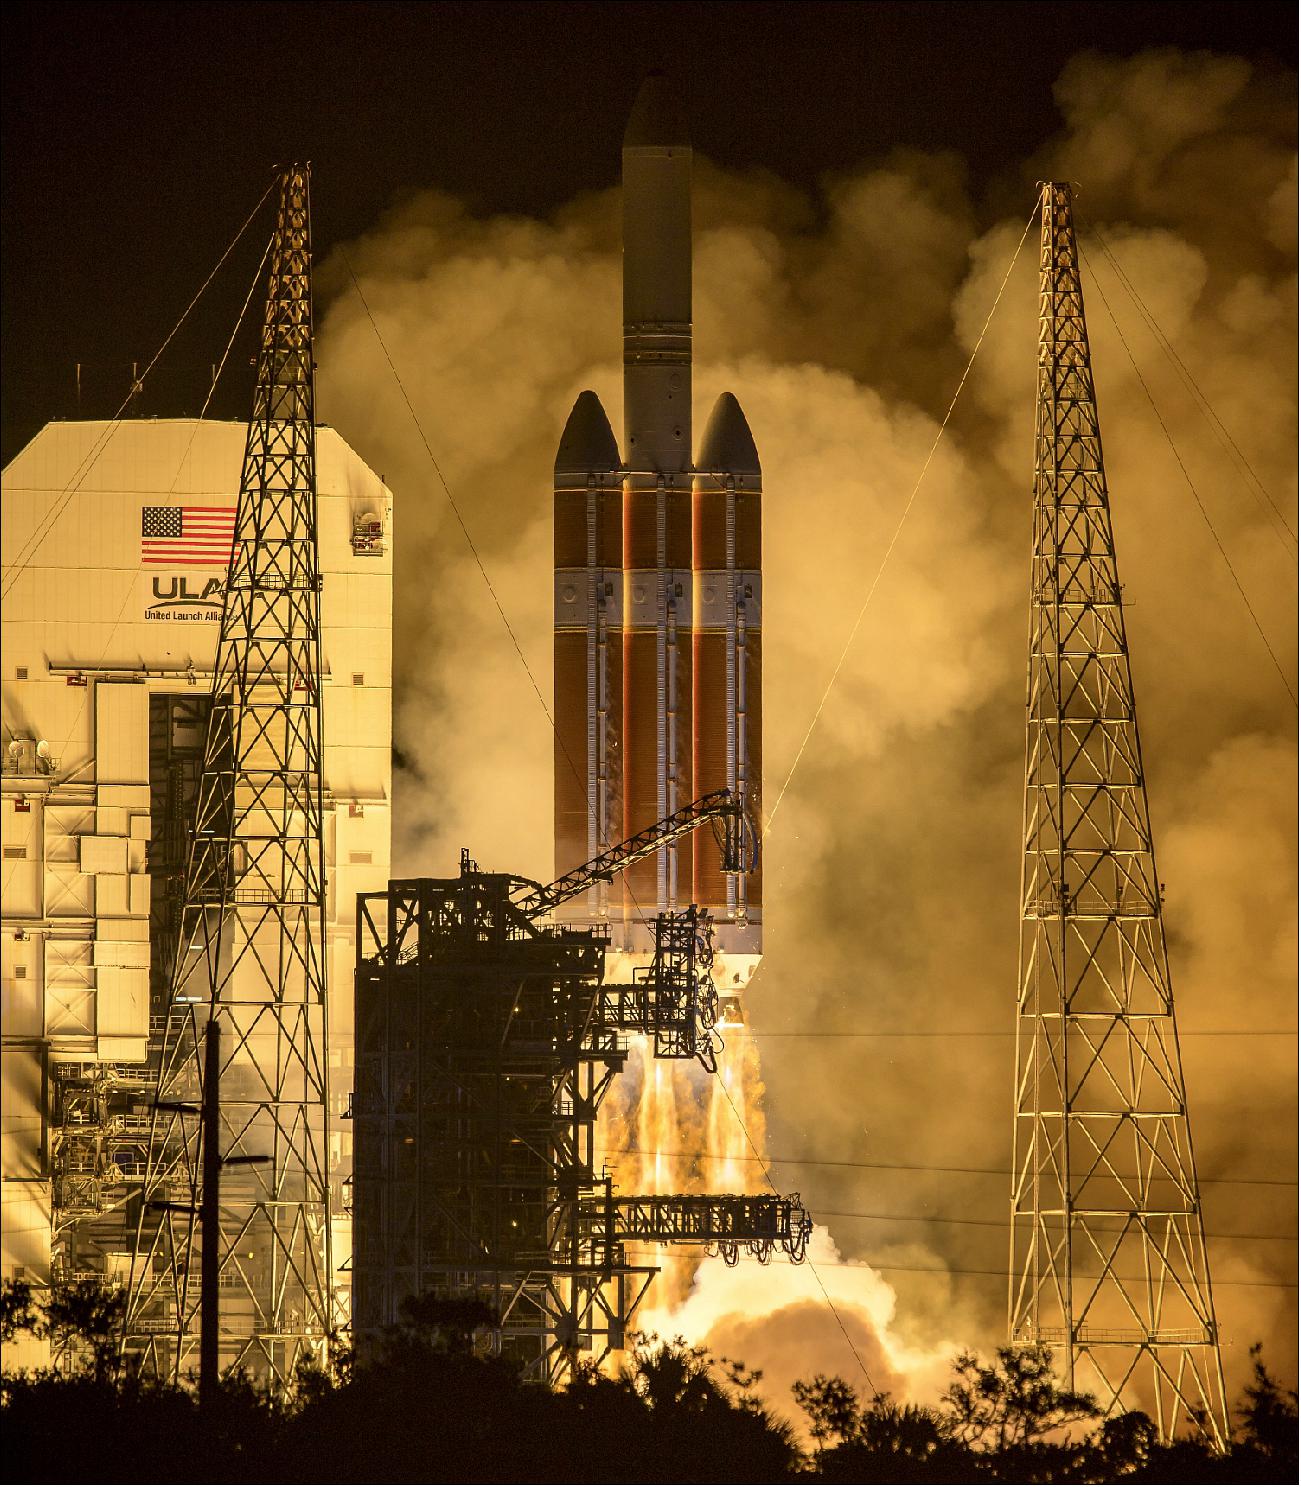 Figure 16: The United Launch Alliance Delta IV Heavy rocket launches NASA's Parker Solar Probe to touch the Sun, Sunday, Aug. 12, 2018, from Launch Complex 37 at Cape Canaveral Air Force Station, Florida. Parker Solar Probe is humanity's first-ever mission into a part of the Sun's atmosphere called the corona. Here it will directly explore solar processes that are key to understanding and forecasting space weather events that can impact life on Earth (image credit: NASA, Bill Ingalls)